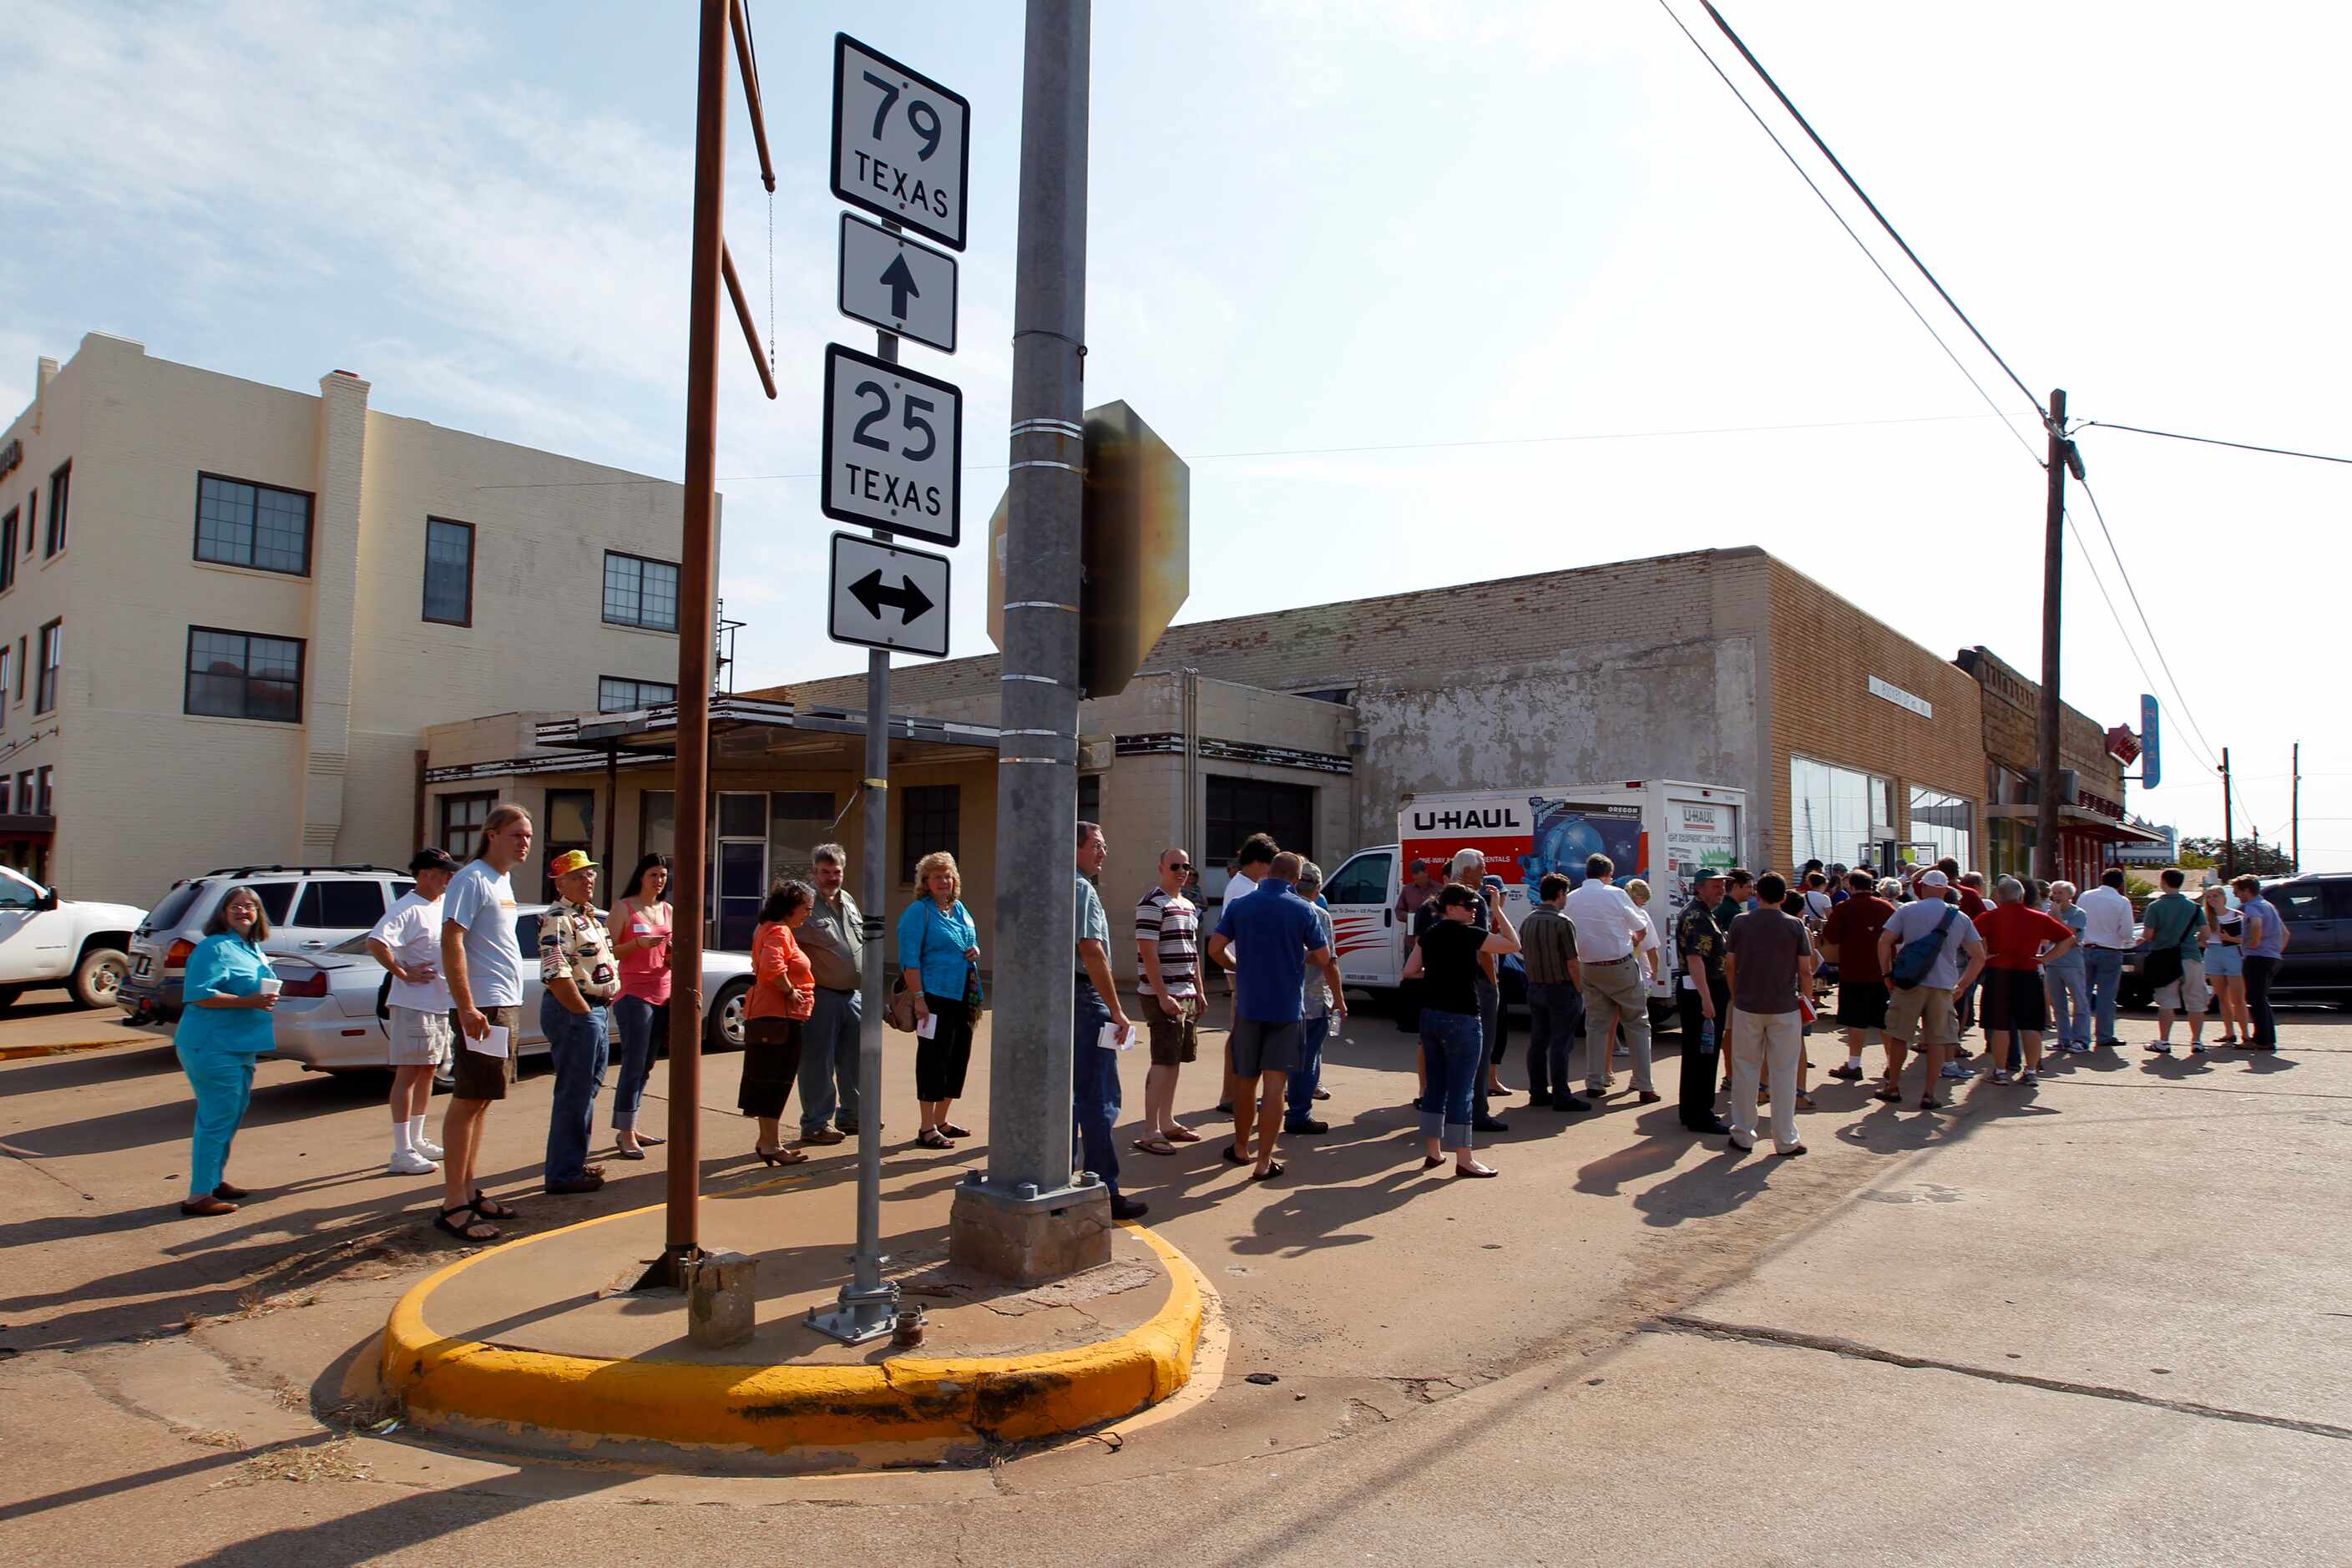 Book buyers lined up to bid on Larry McMurtry's private collection of books in downtown...